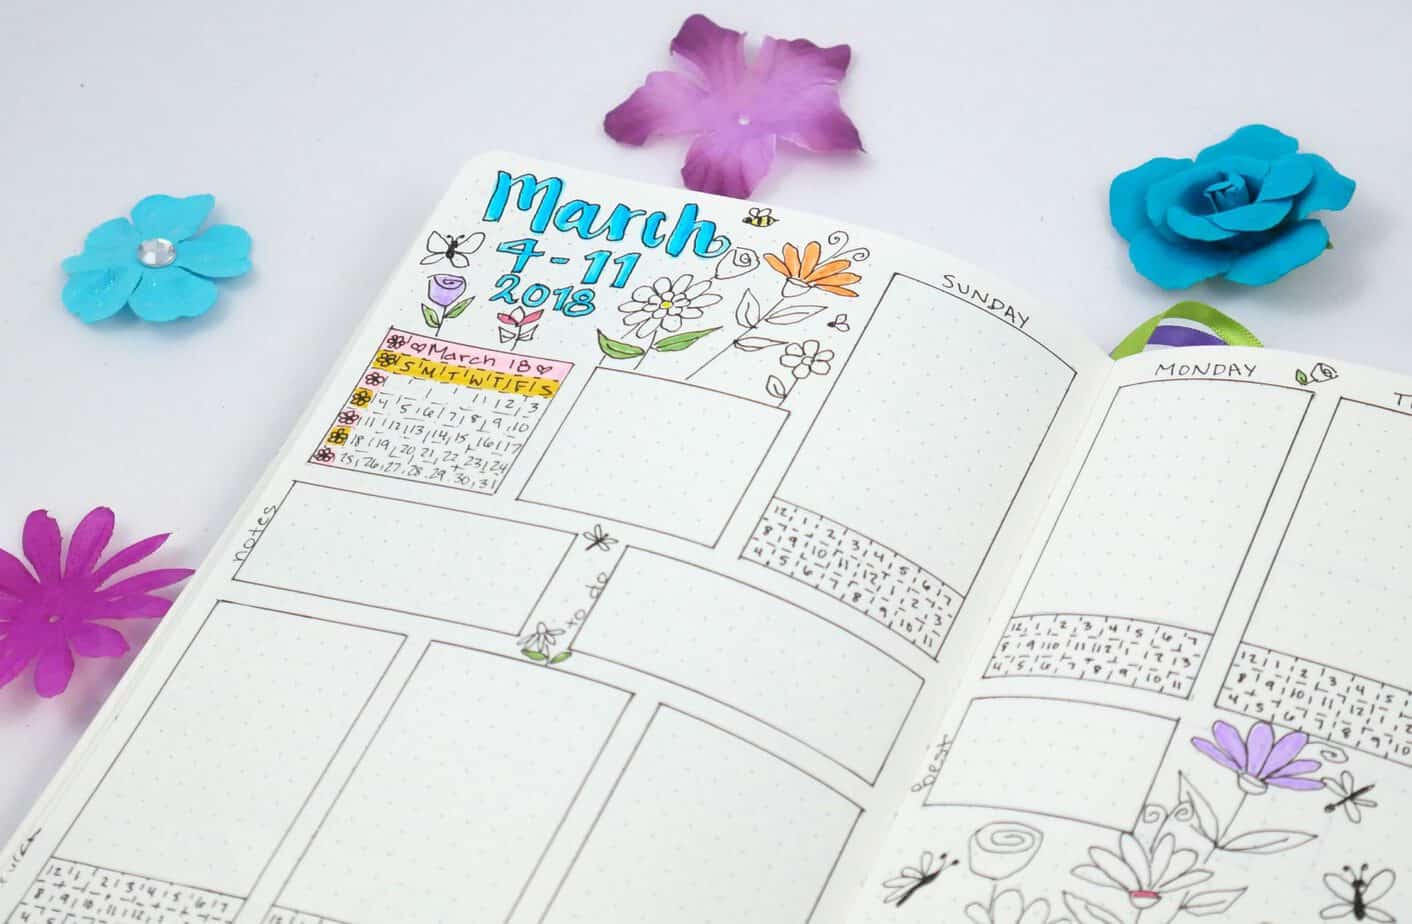 Daily Goals Habit Tracker Stamp, Goal Planner Stamps, Productivity  Planner Stamp for BuJo, Student Planner Bullet Journal Stamps